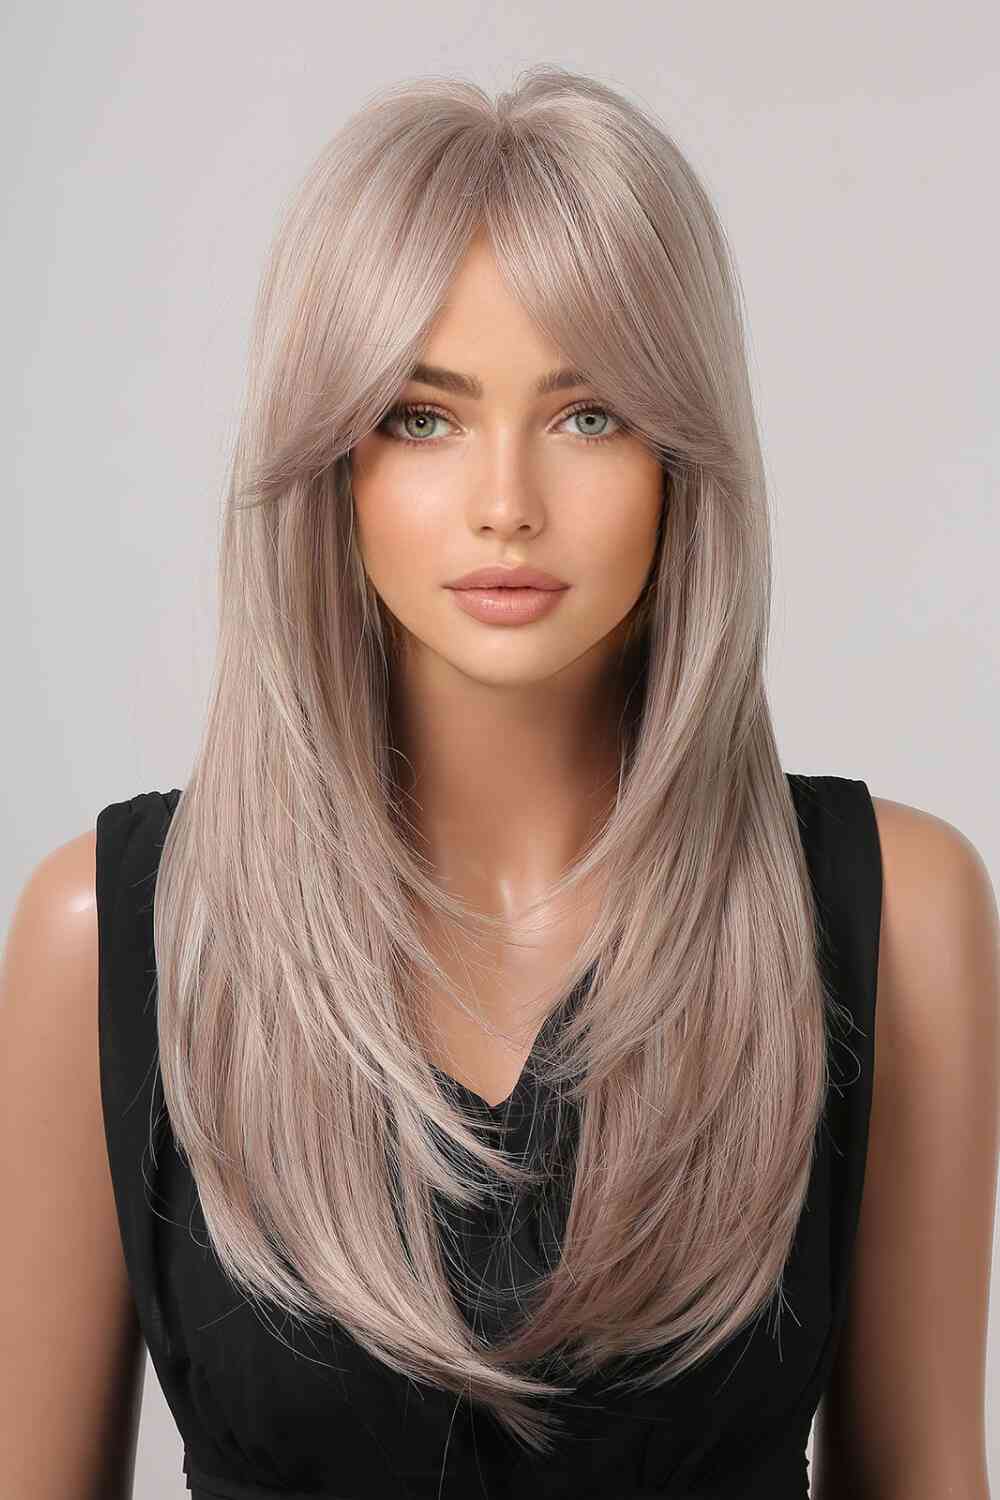 13*1" Full-Machine Wigs Synthetic Long Straight 22" Blonde/Light Brown One Size